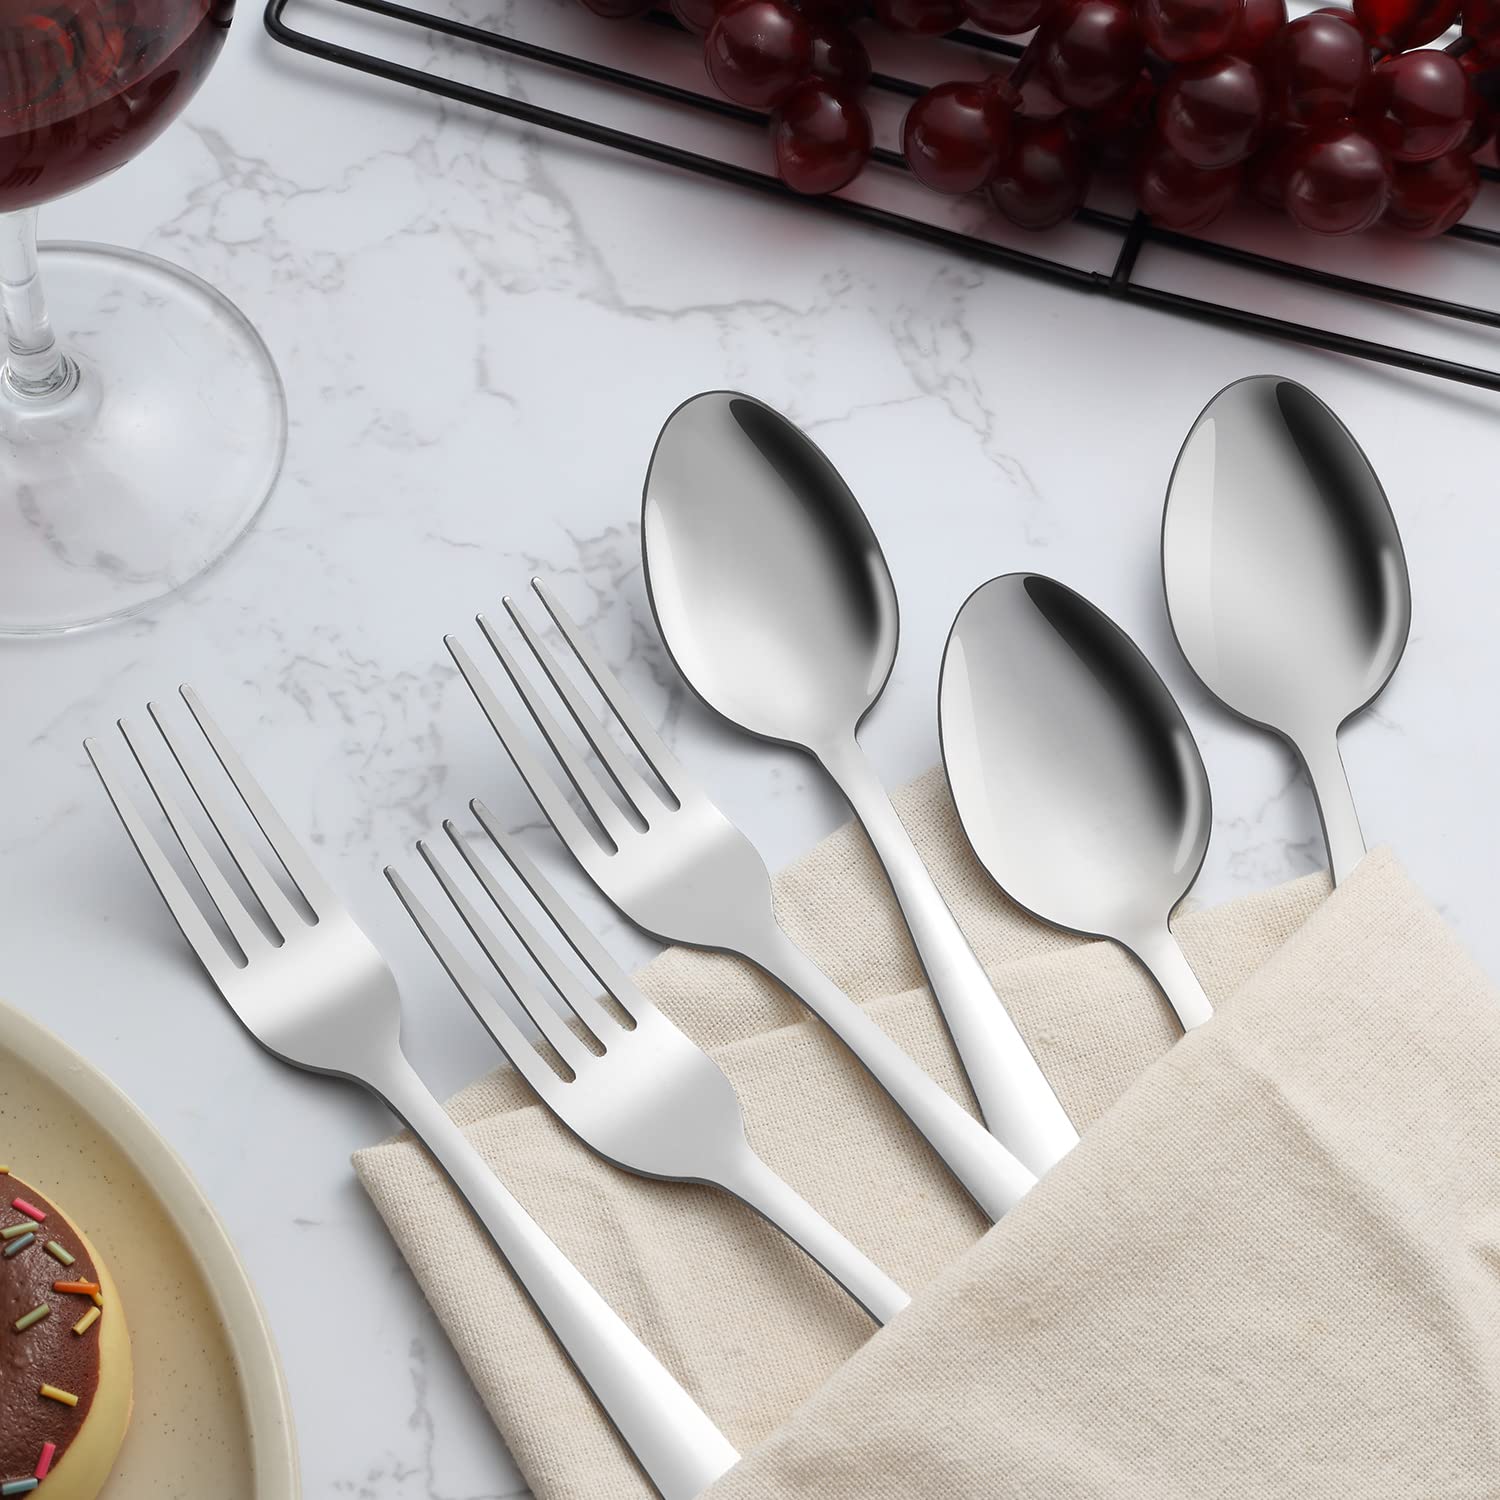 Unokit 72-piece Forks and Spoons Set, contain 36 spoons and 36 forks, Mirror Polished, Spoons and Forks Set for Restaurants/Hotels/Canteens/Cafeteria, Dishwasher Safe